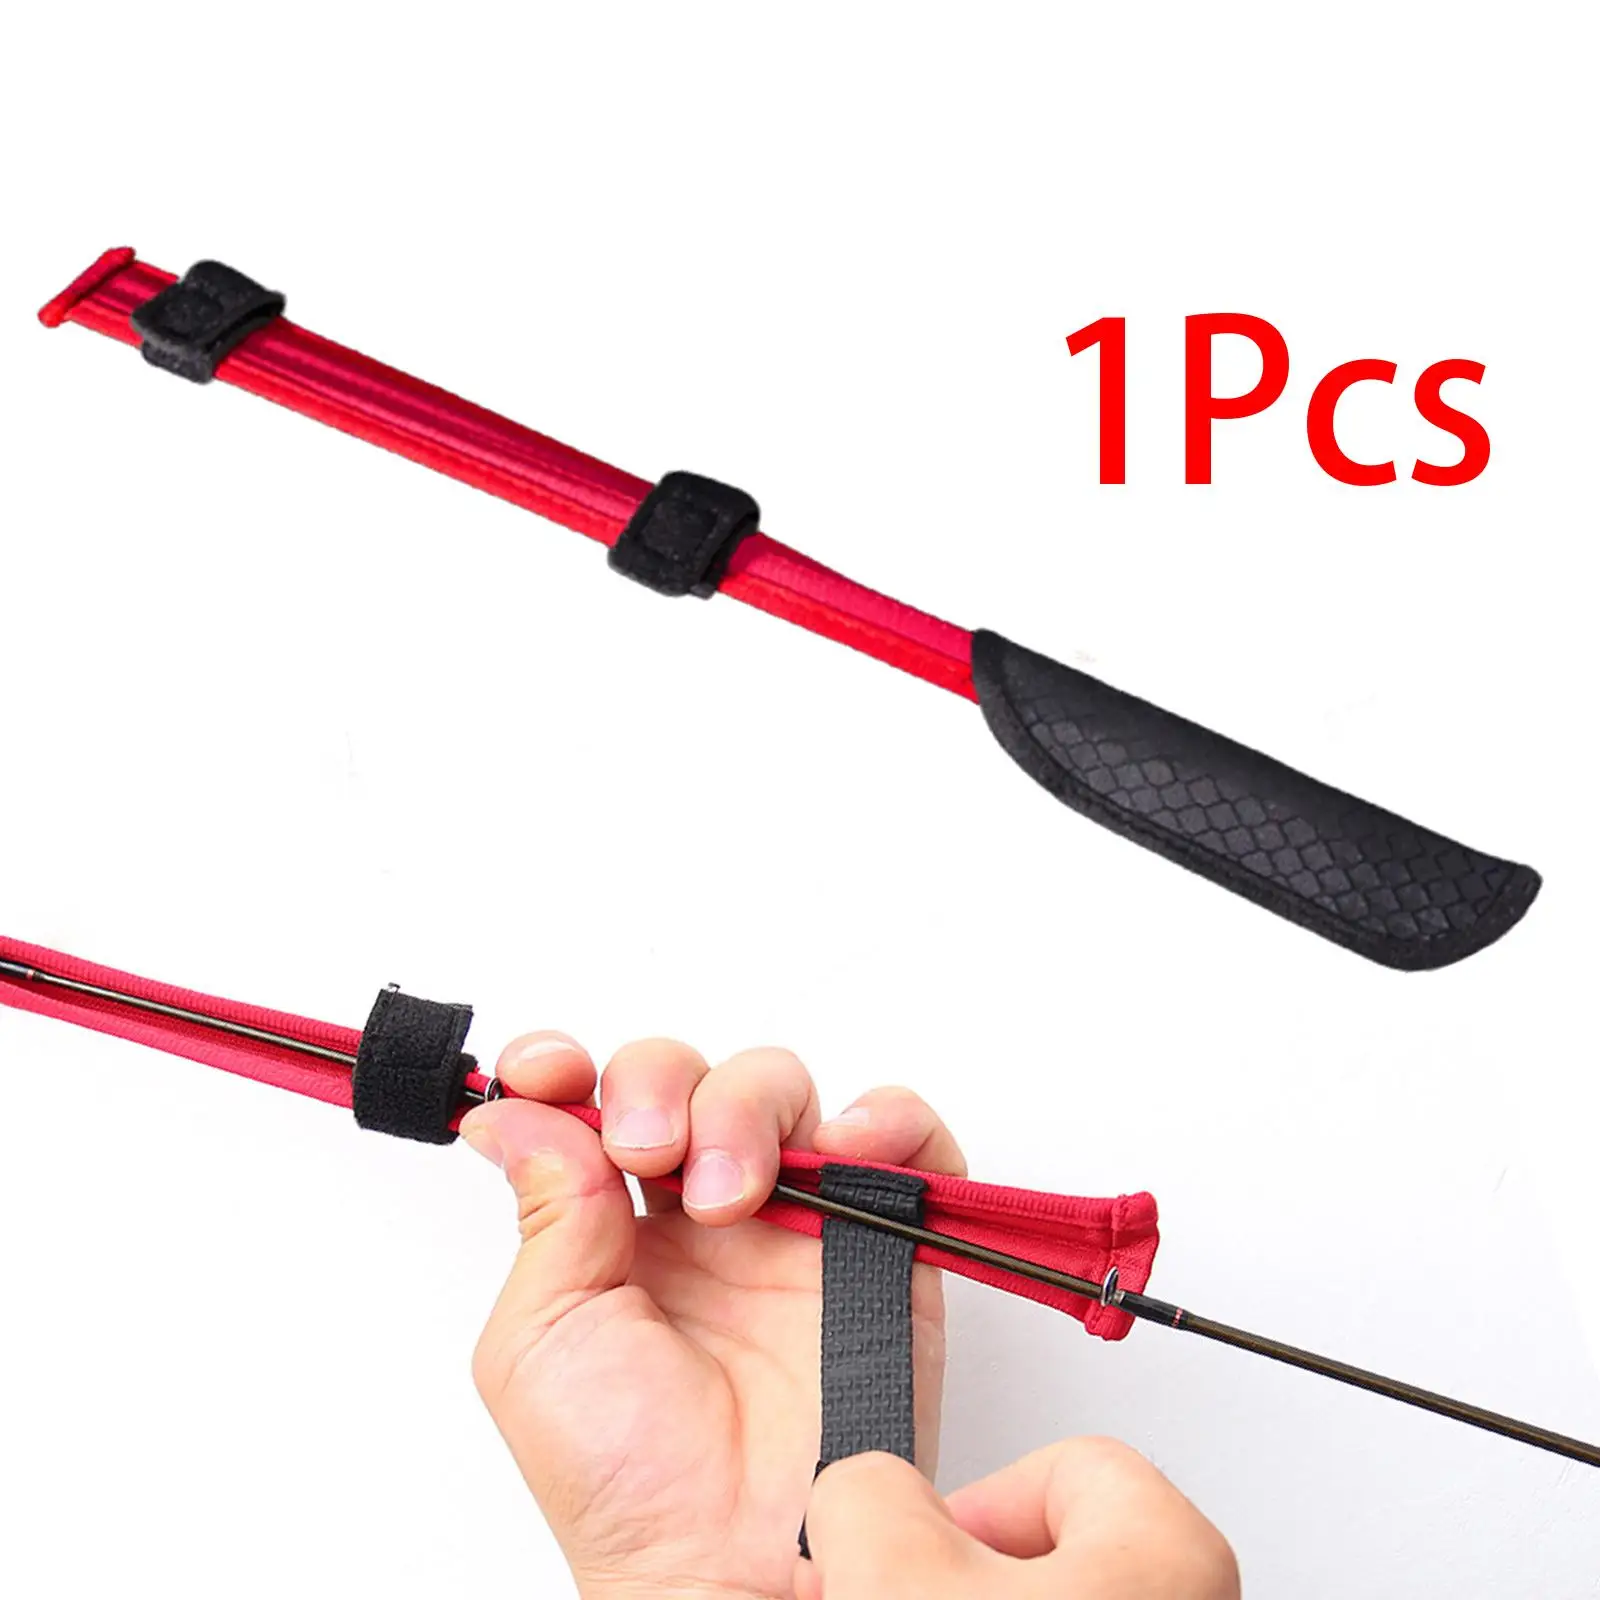 Carbon Fishing Pole Tip Accessory Surf Fishing Rods Fishing Rod Socks Cases Head Cover Full Protection Protective Cover Sleeve